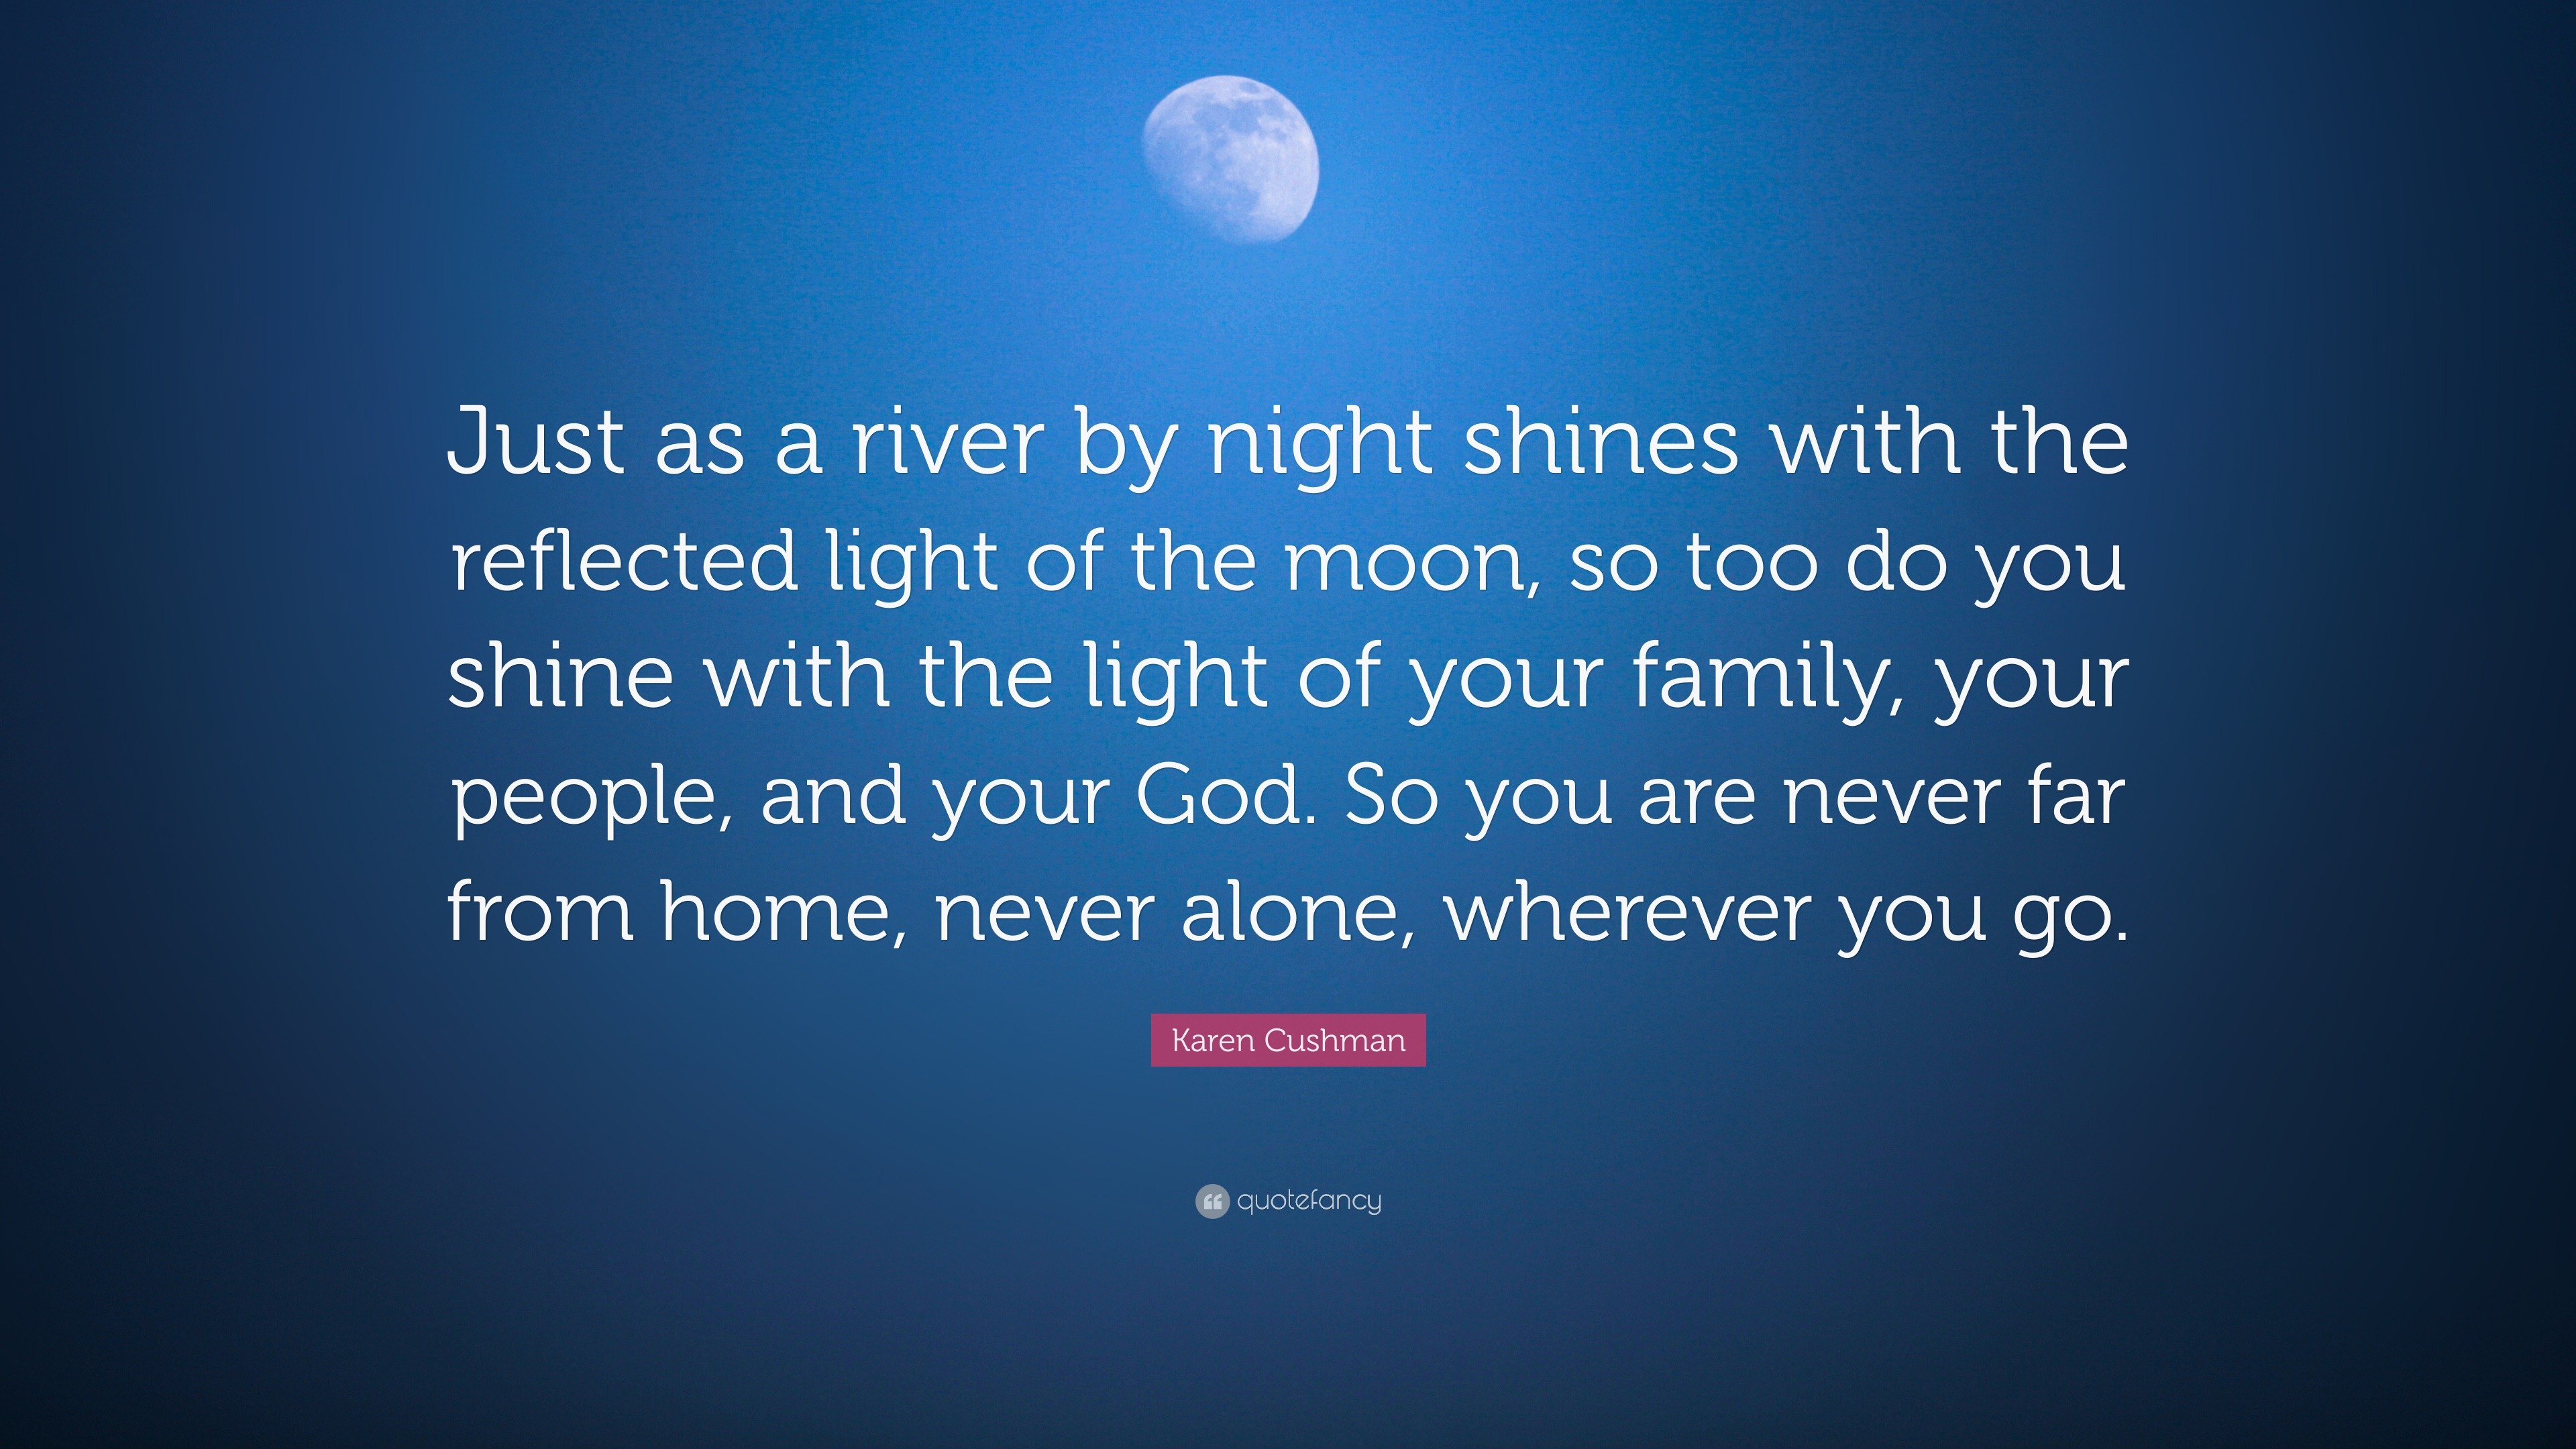 Karen Cushman Quote Just As A River By Night Shines With The Reflected Light Of The Moon So Too Do You Shine With The Light Of Your Family